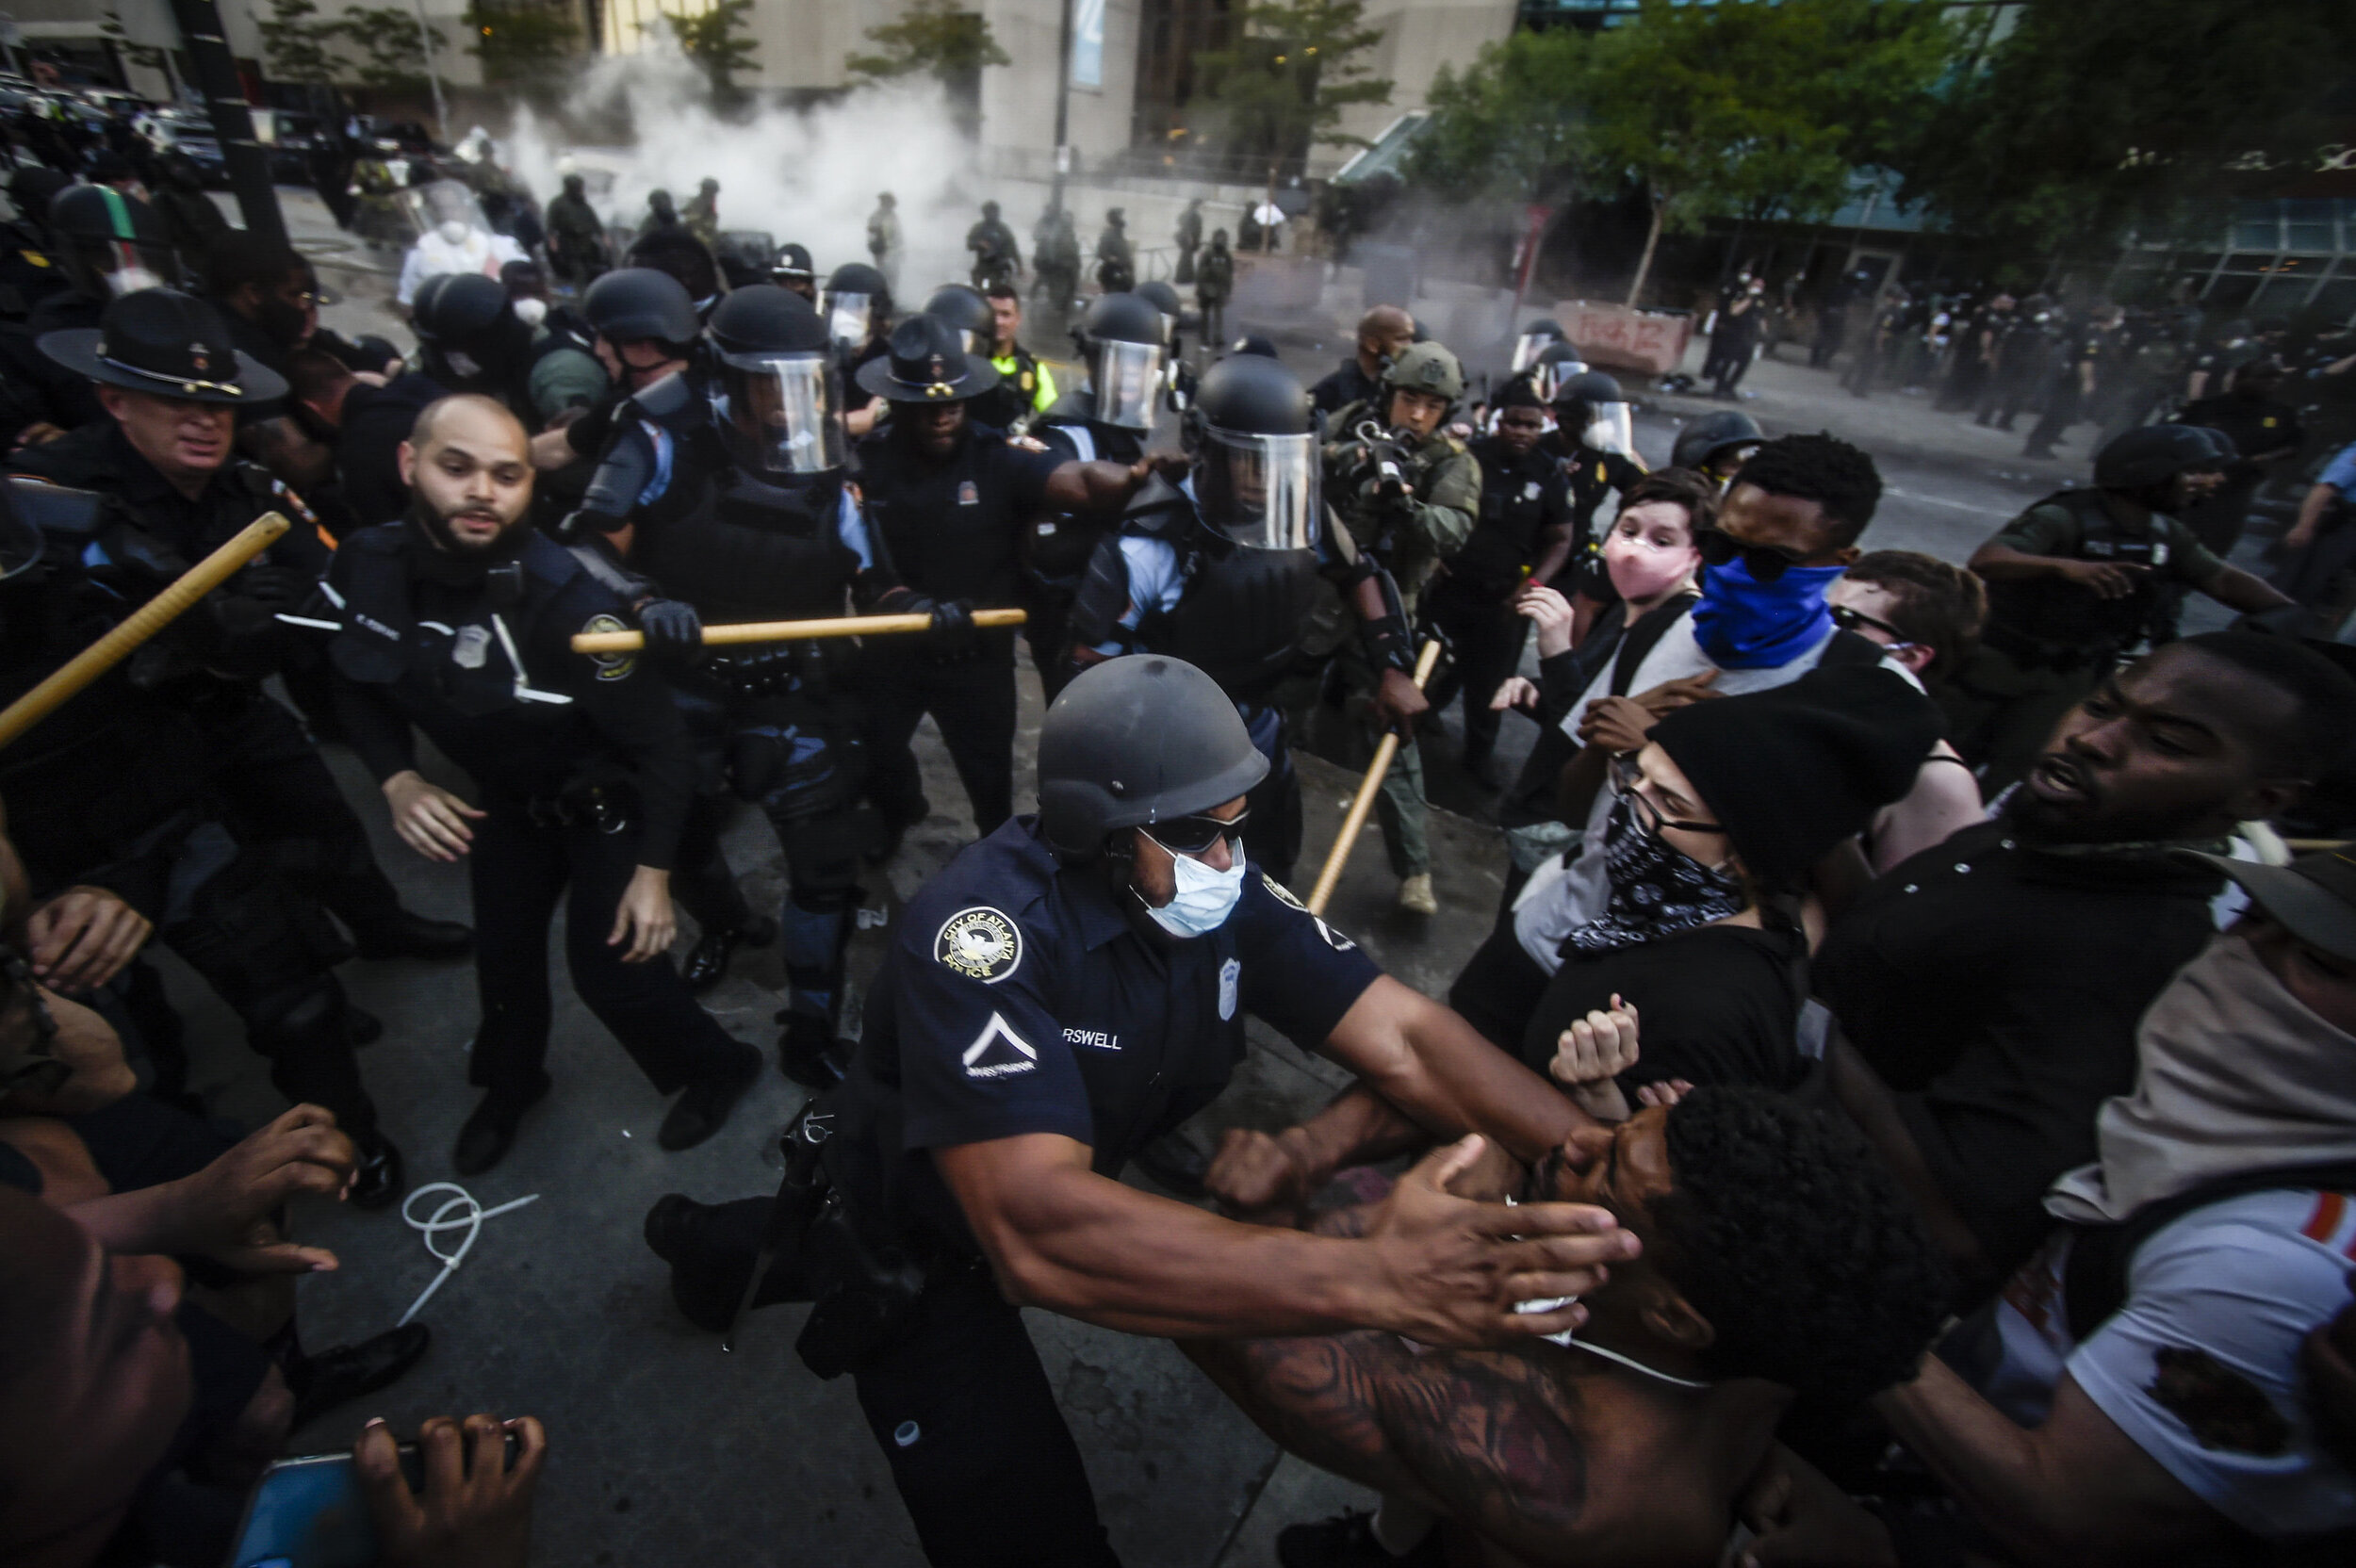  Police officers and protesters clash near CNN Center, May 29, 2020, in Atlanta, in response to George Floyd's death. The protest started peacefully earlier in the day before demonstrators clashed with police. (AP Photo/Mike Stewart) 